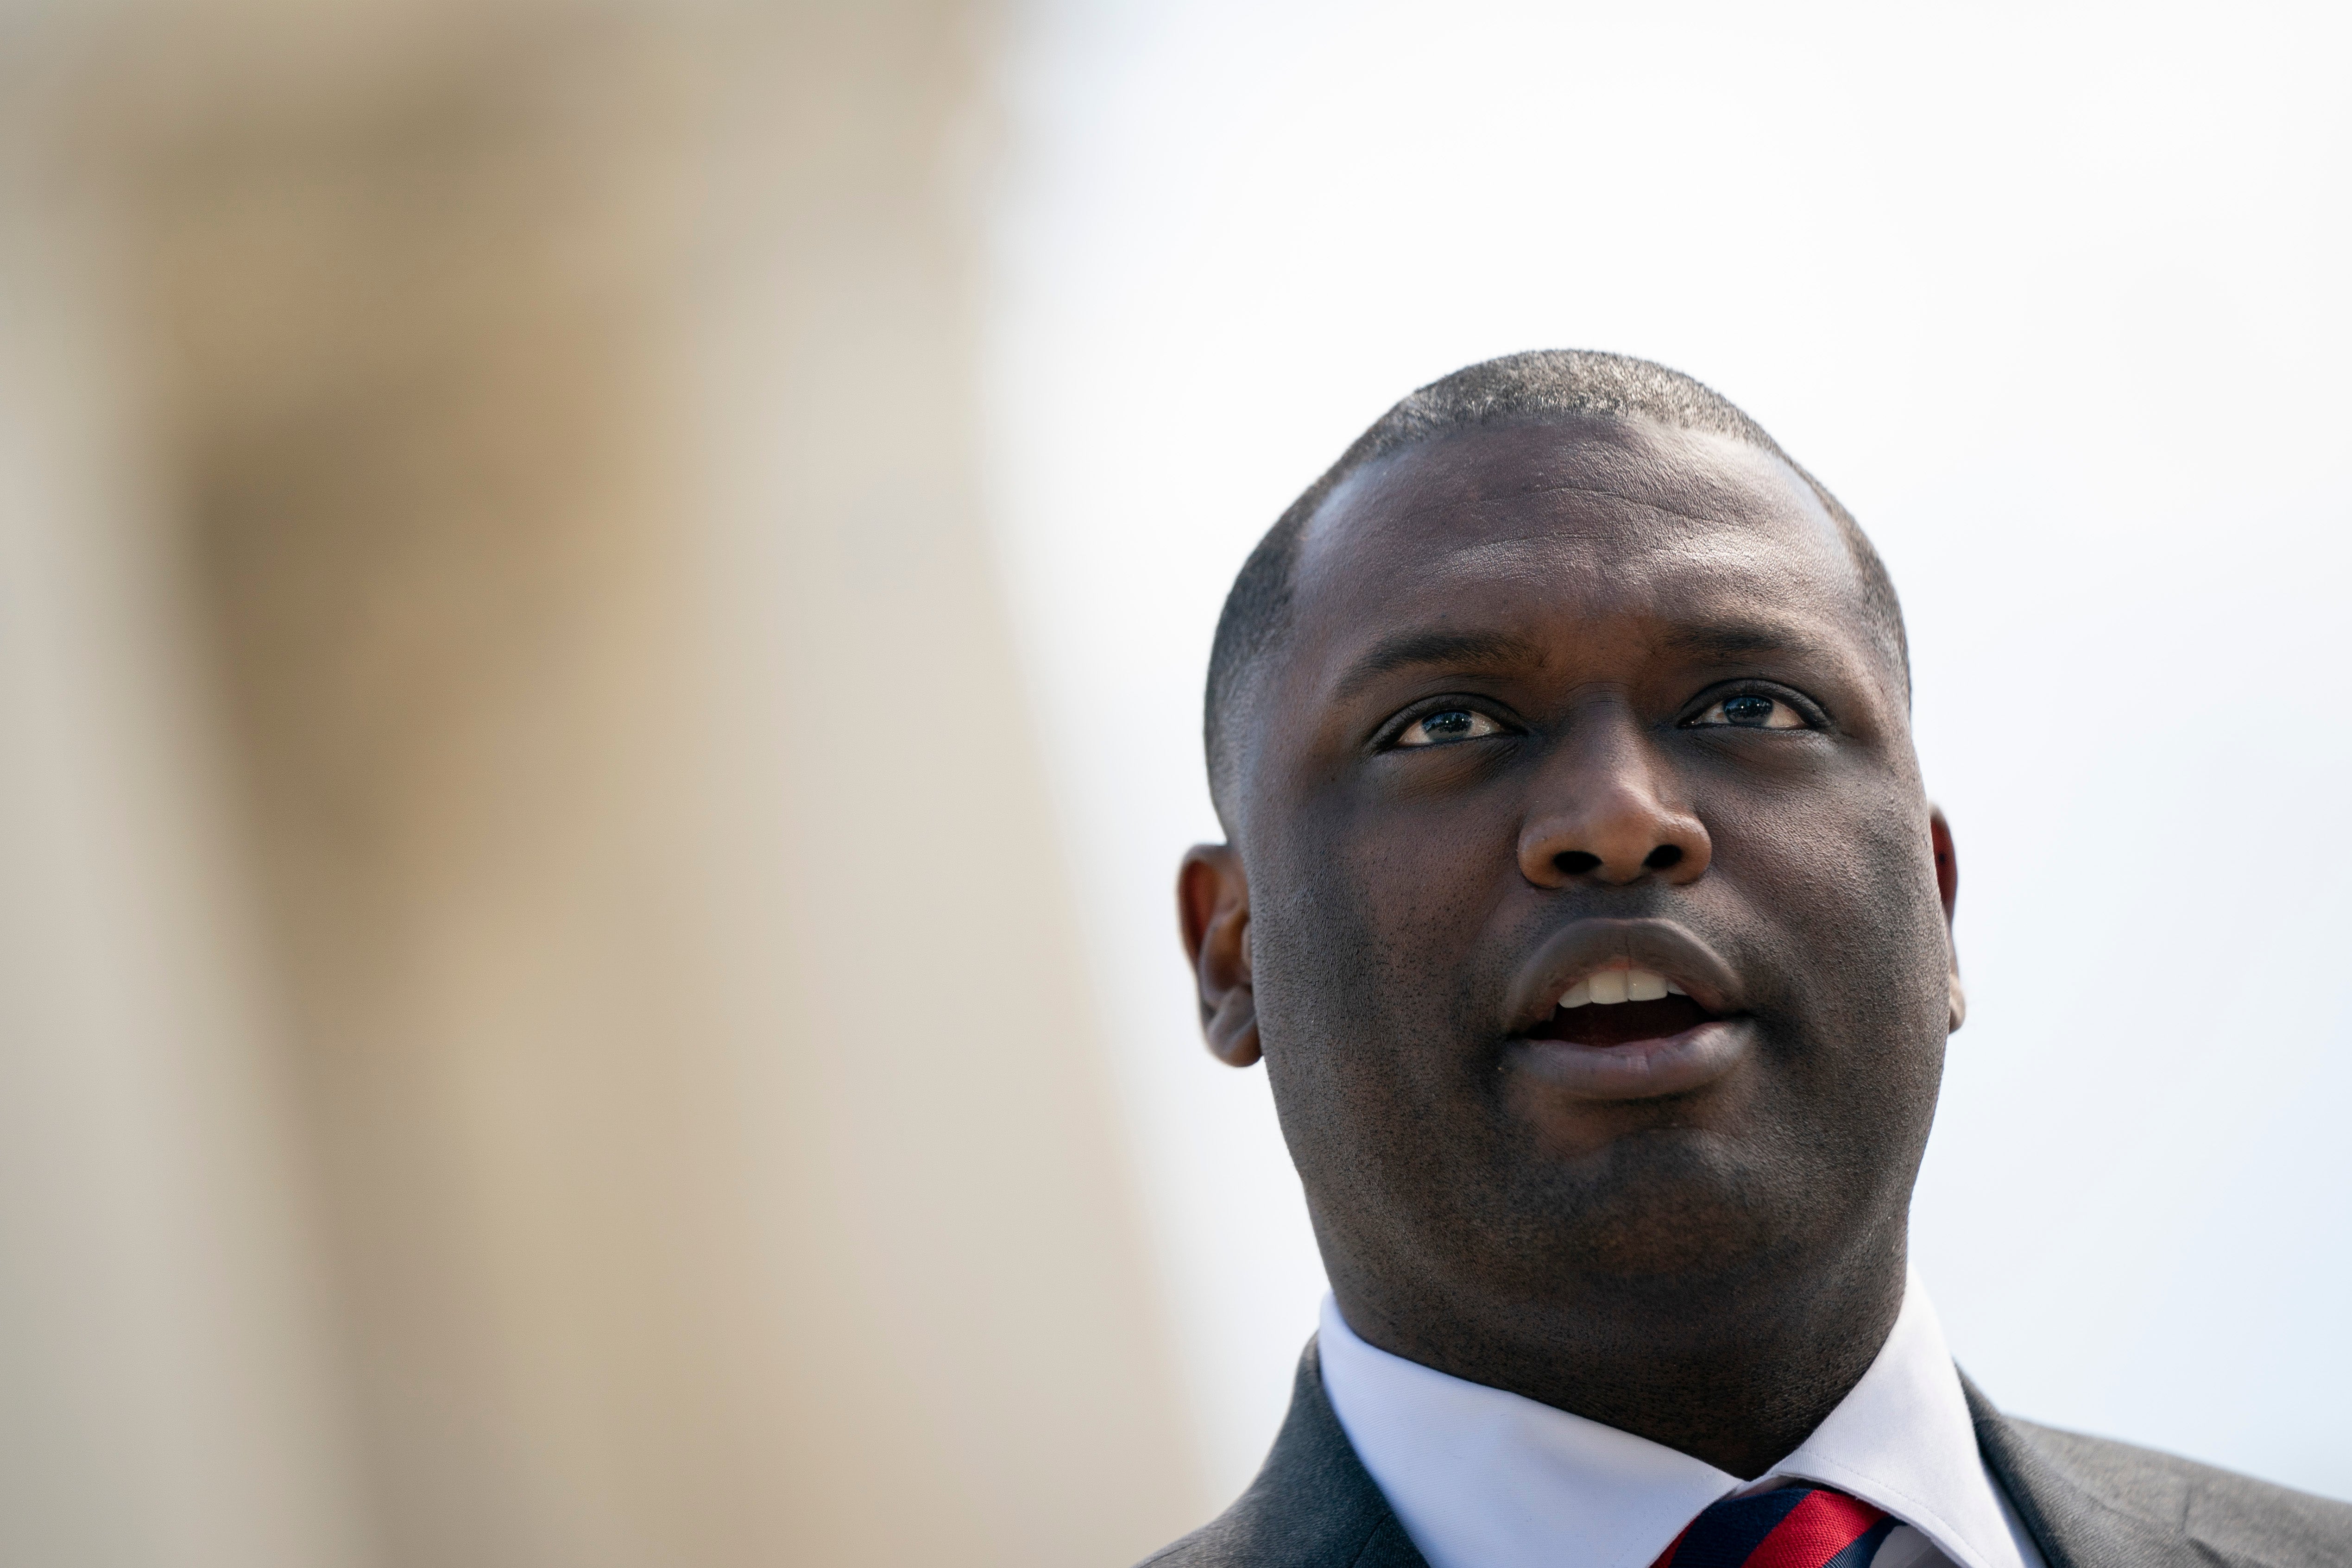 Democrat Rep Mondaire Jones of New York reportedly voted by proxy while attending his friend, Issa Rae’s, wedding in France